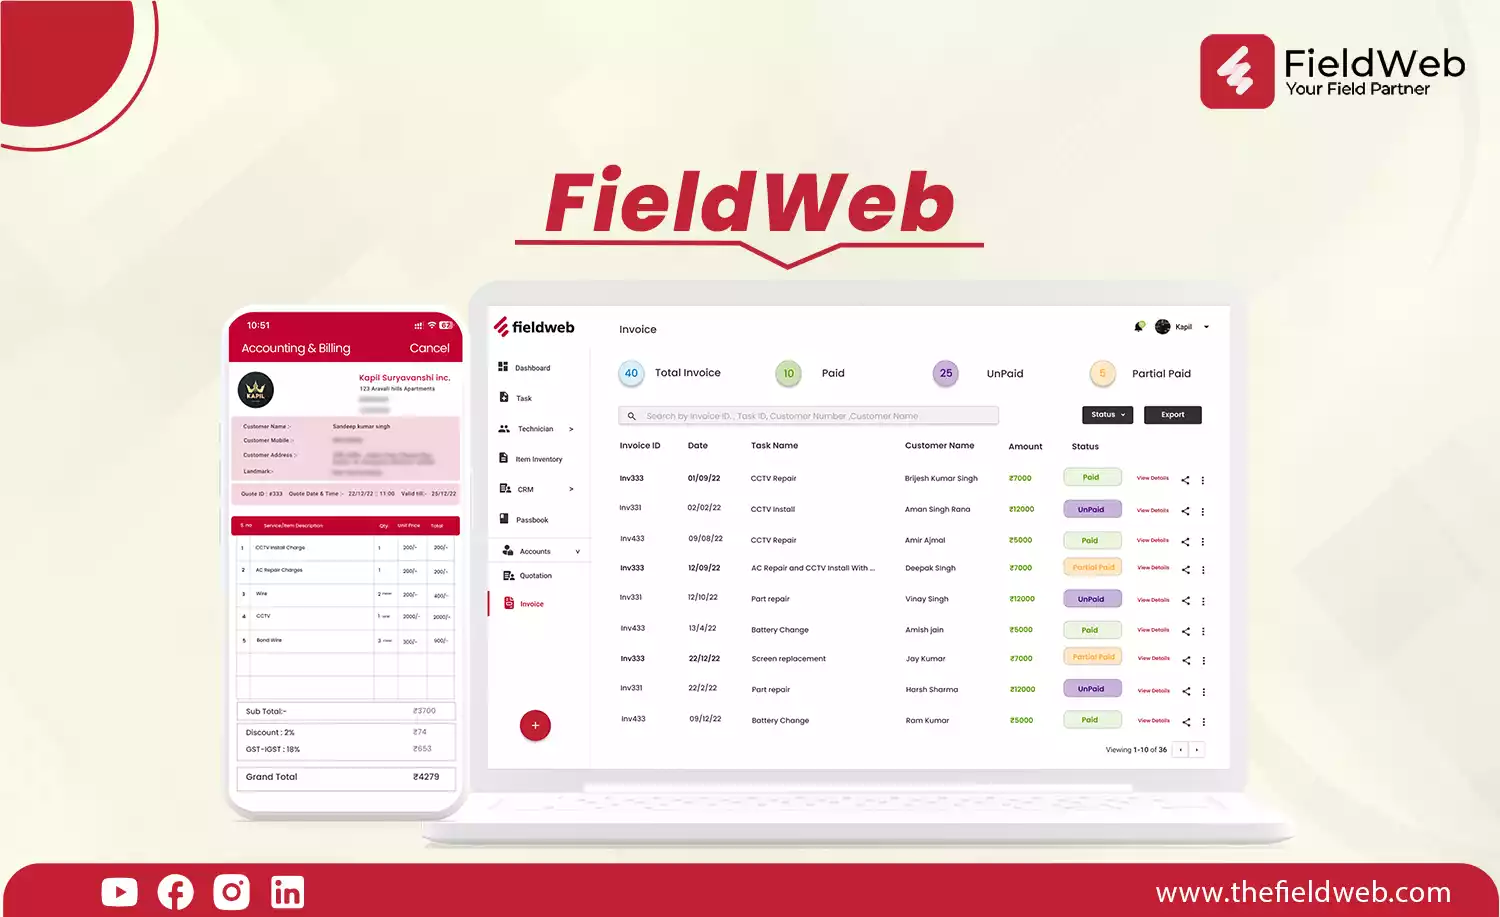 image is displaying the account management features of FieldWeb-It is displaying the quotation and invoice user interface of FieldWeb